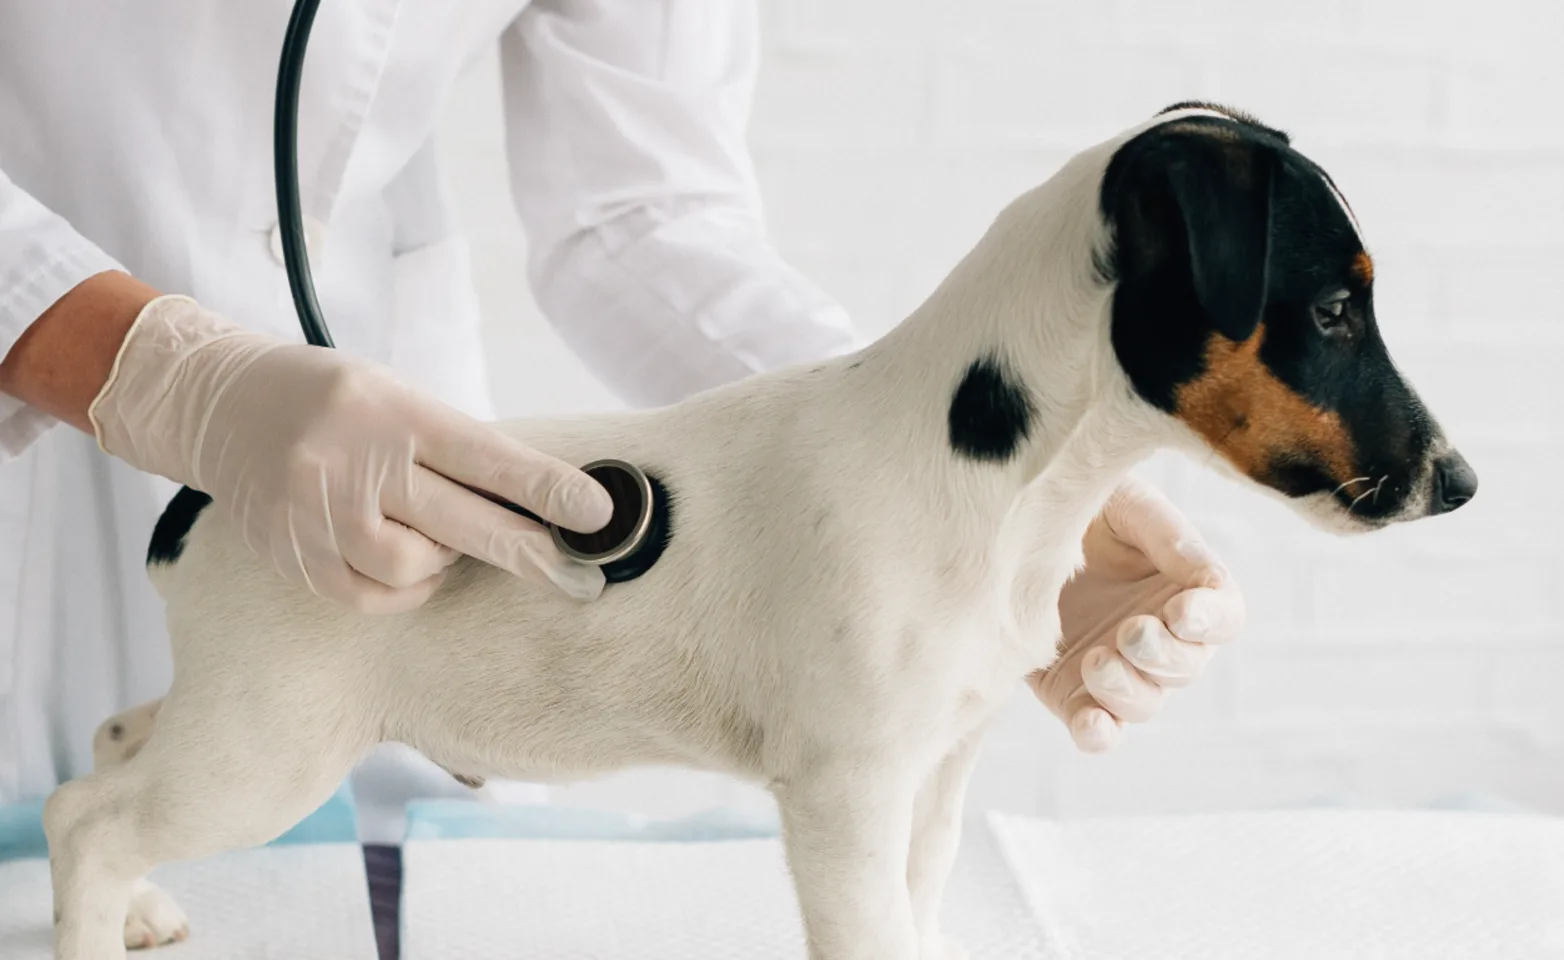 Dog getting a check up